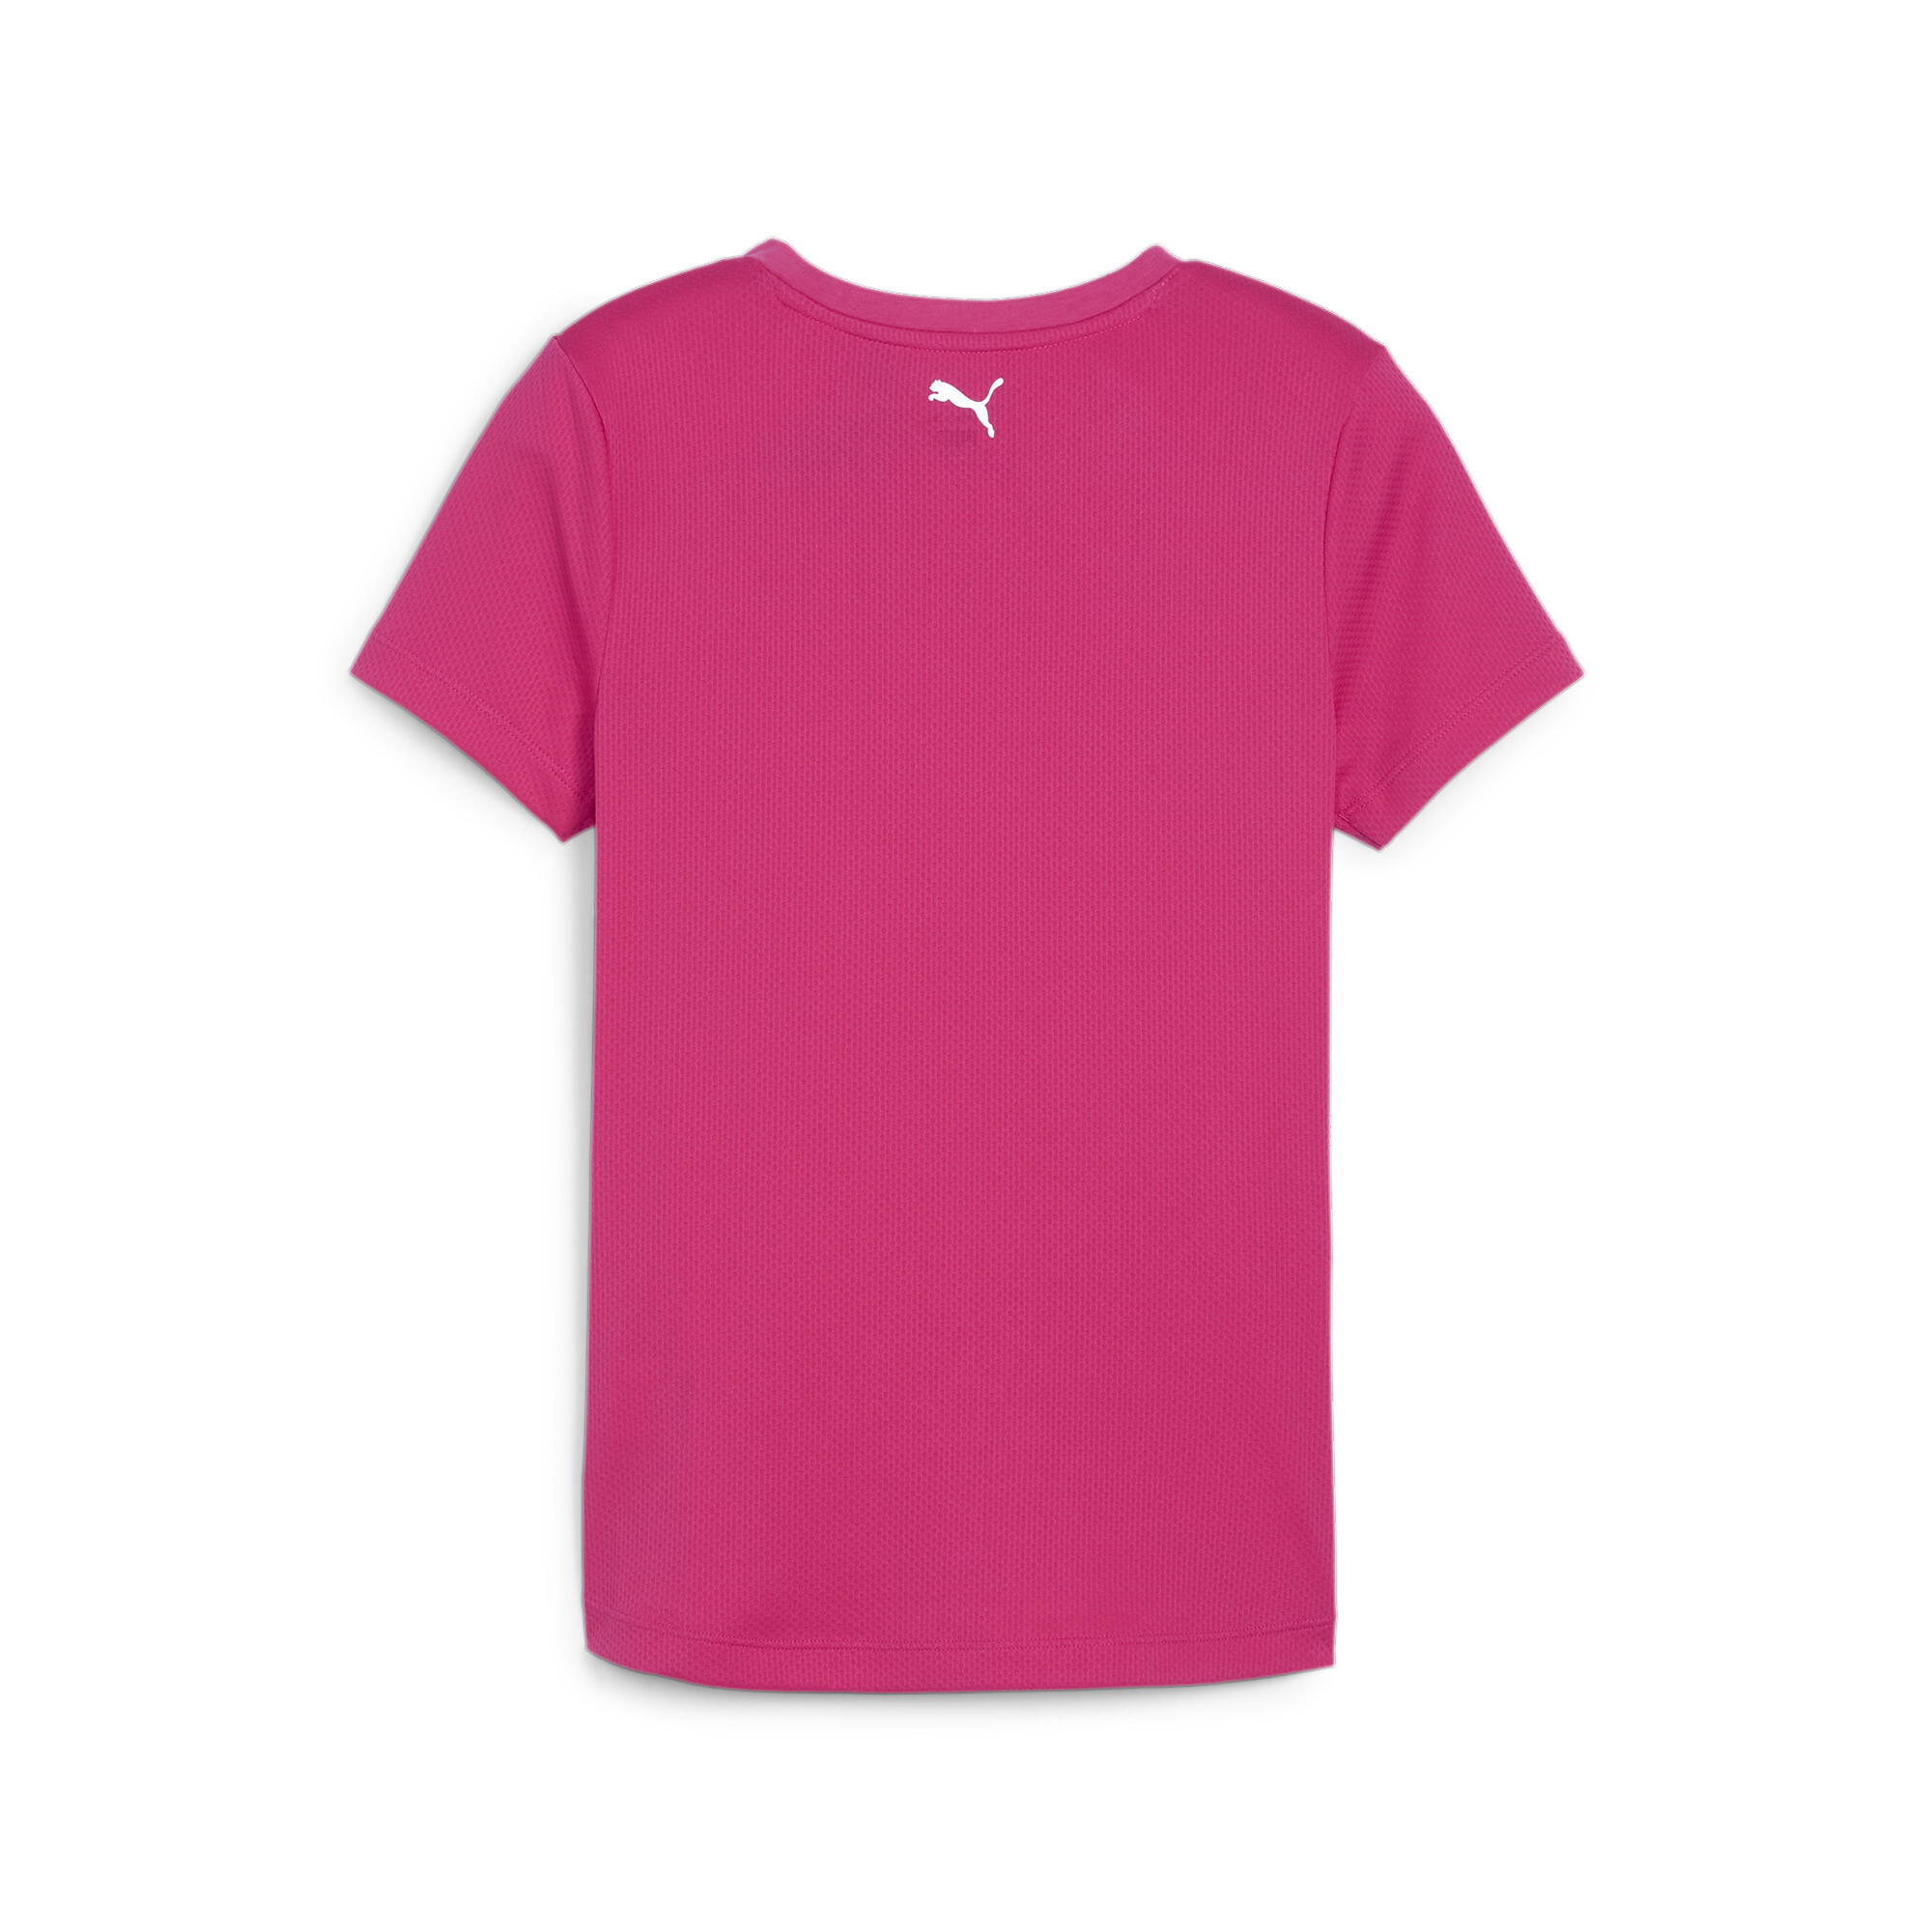 Women's Puma FIT Youth T-Shirt, Pink, Size 9-10Y, Shop